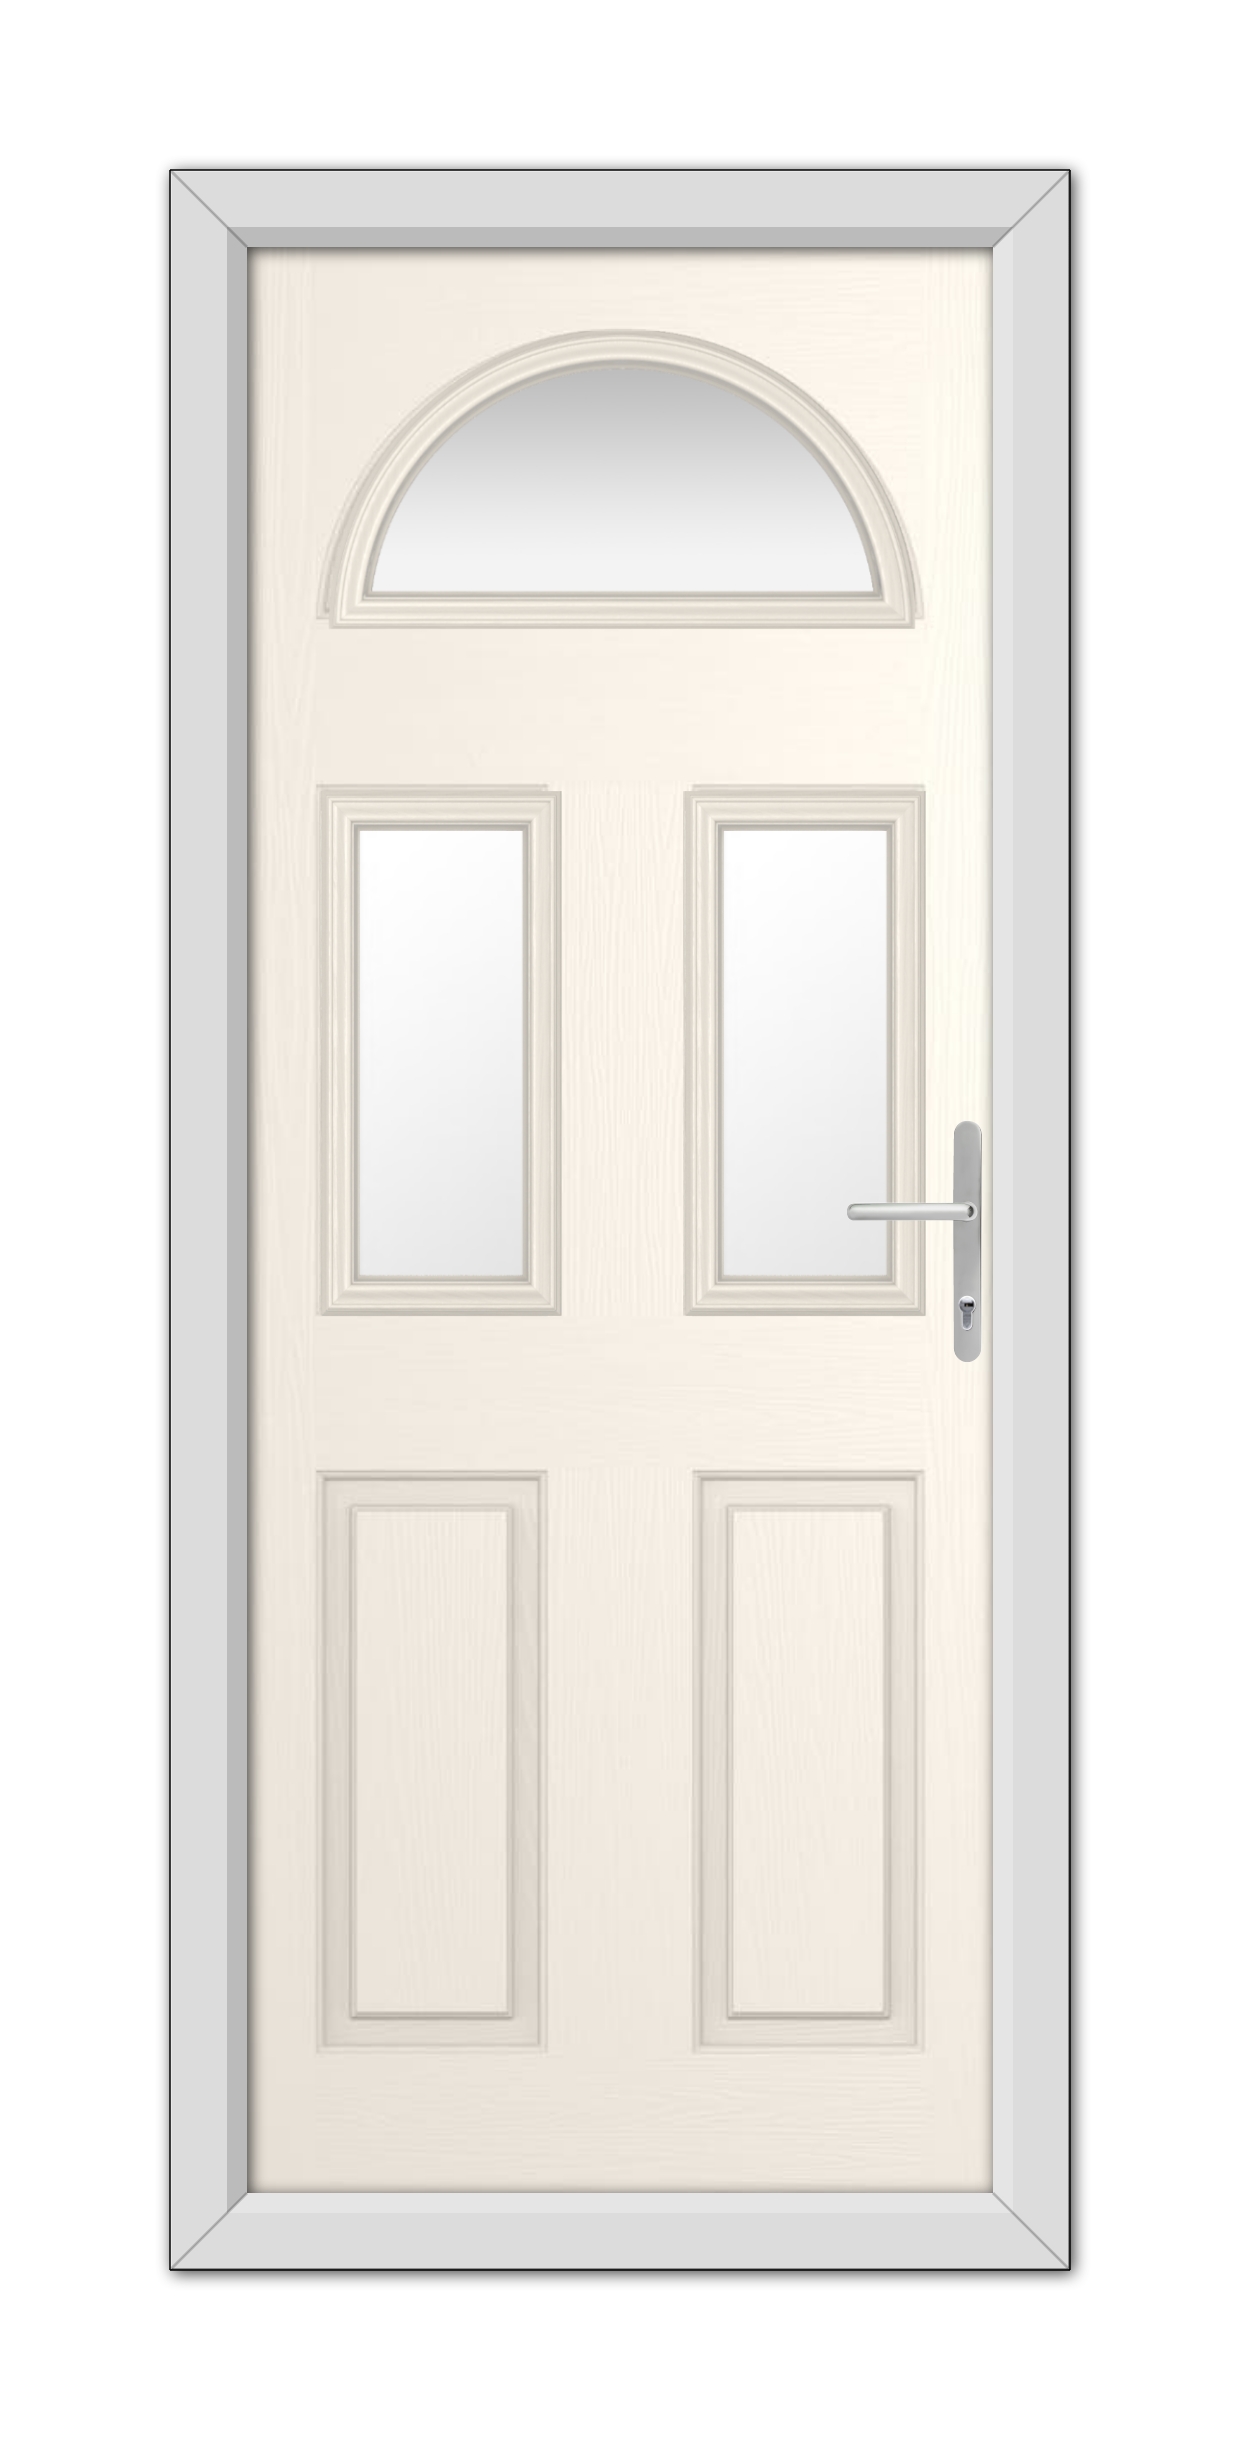 A White Foil Winslow 3 Composite Door 48mm Timber Core with a semicircular window at the top, four rectangular panels, and a metallic handle, set within a simple frame.